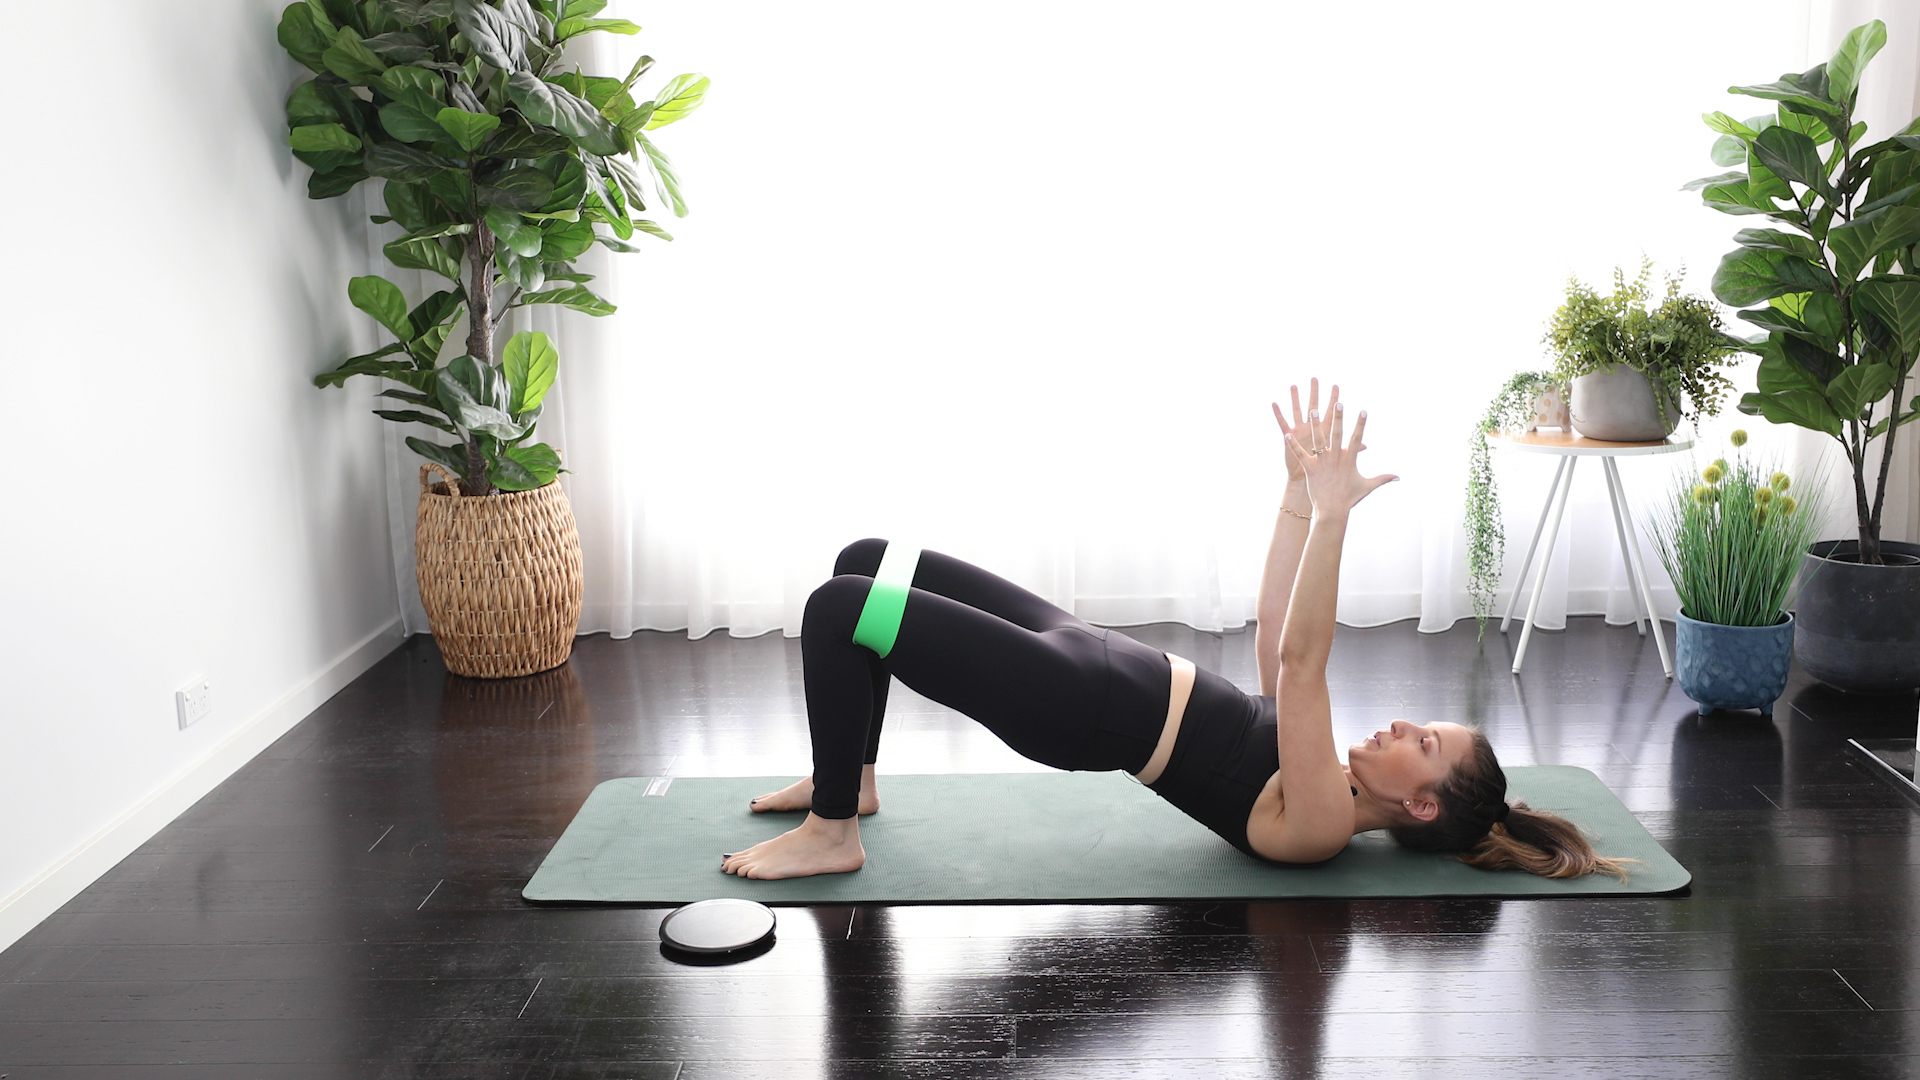 30-Minute Full-Body Pilates Workout for All Levels